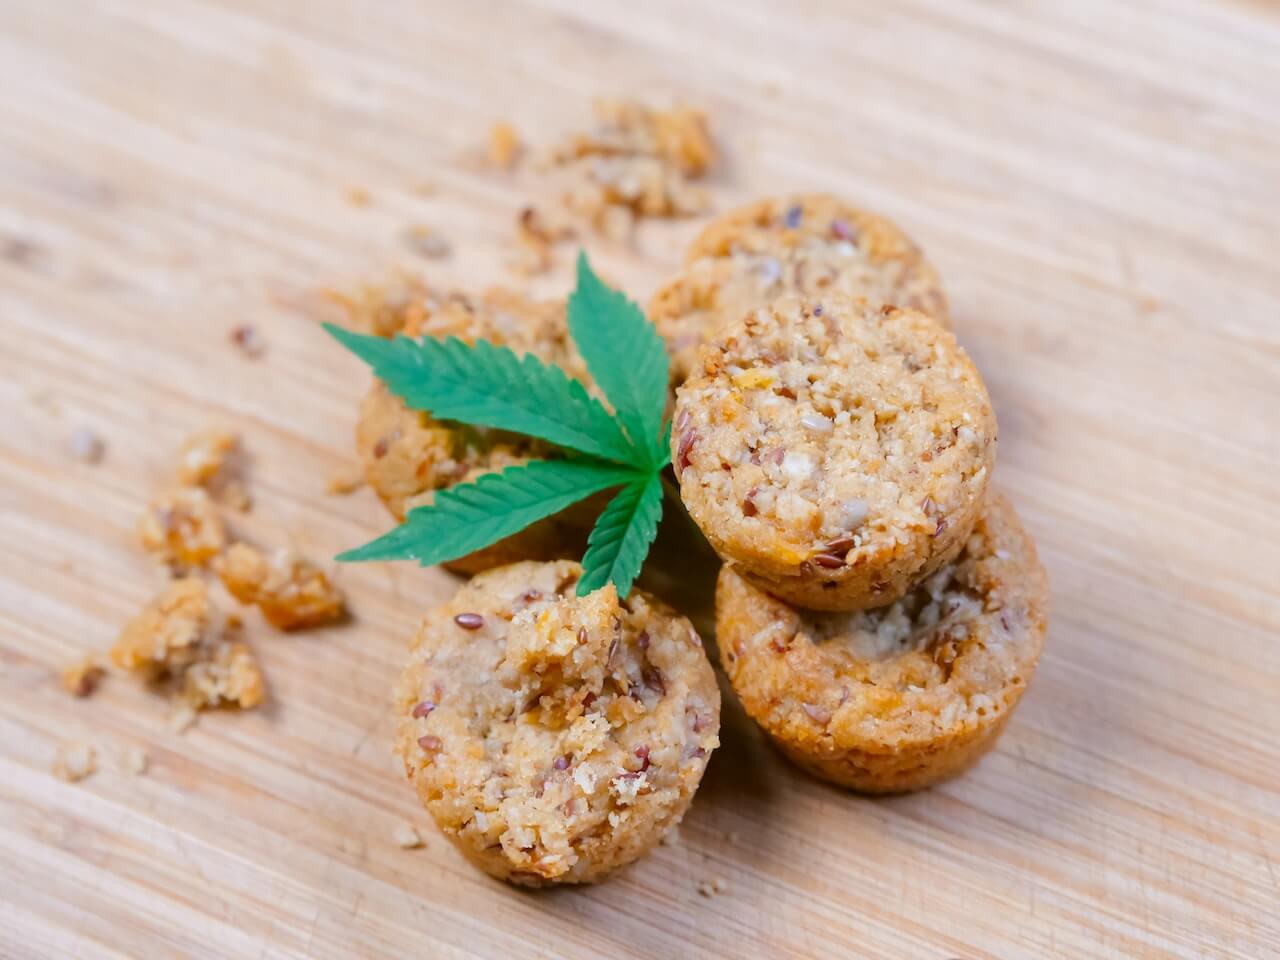 Baked muffins with cannabis leaf